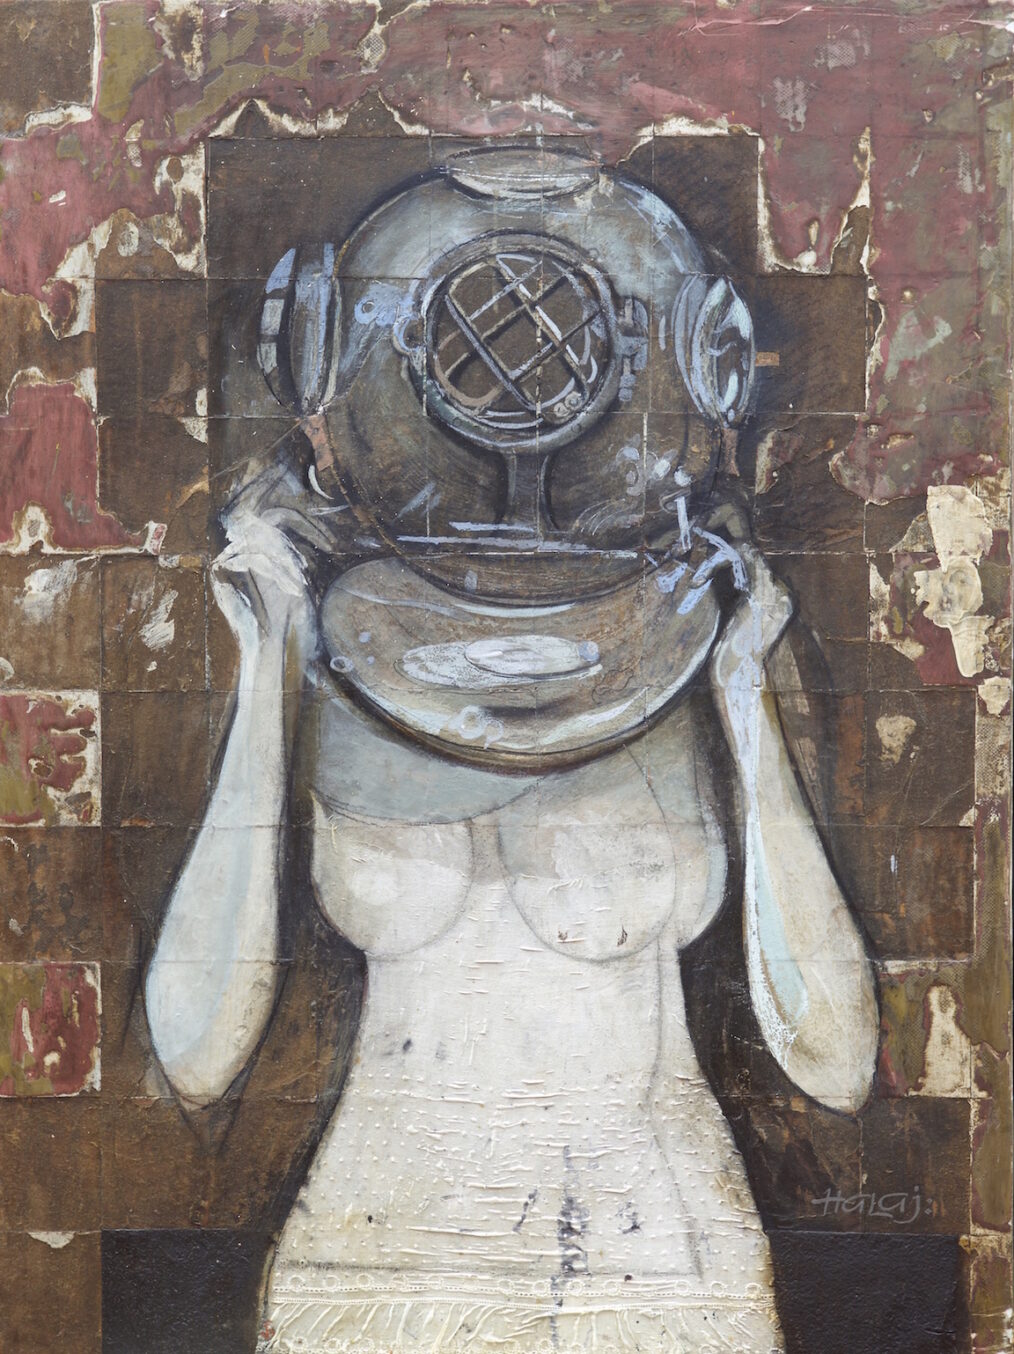 "Diver" 2015 Textile, paper, fabric, emulsion, mixed media on panel, 40x30 in. (101.6x76.2 cm) Private Collection, Beverly Hills, CA